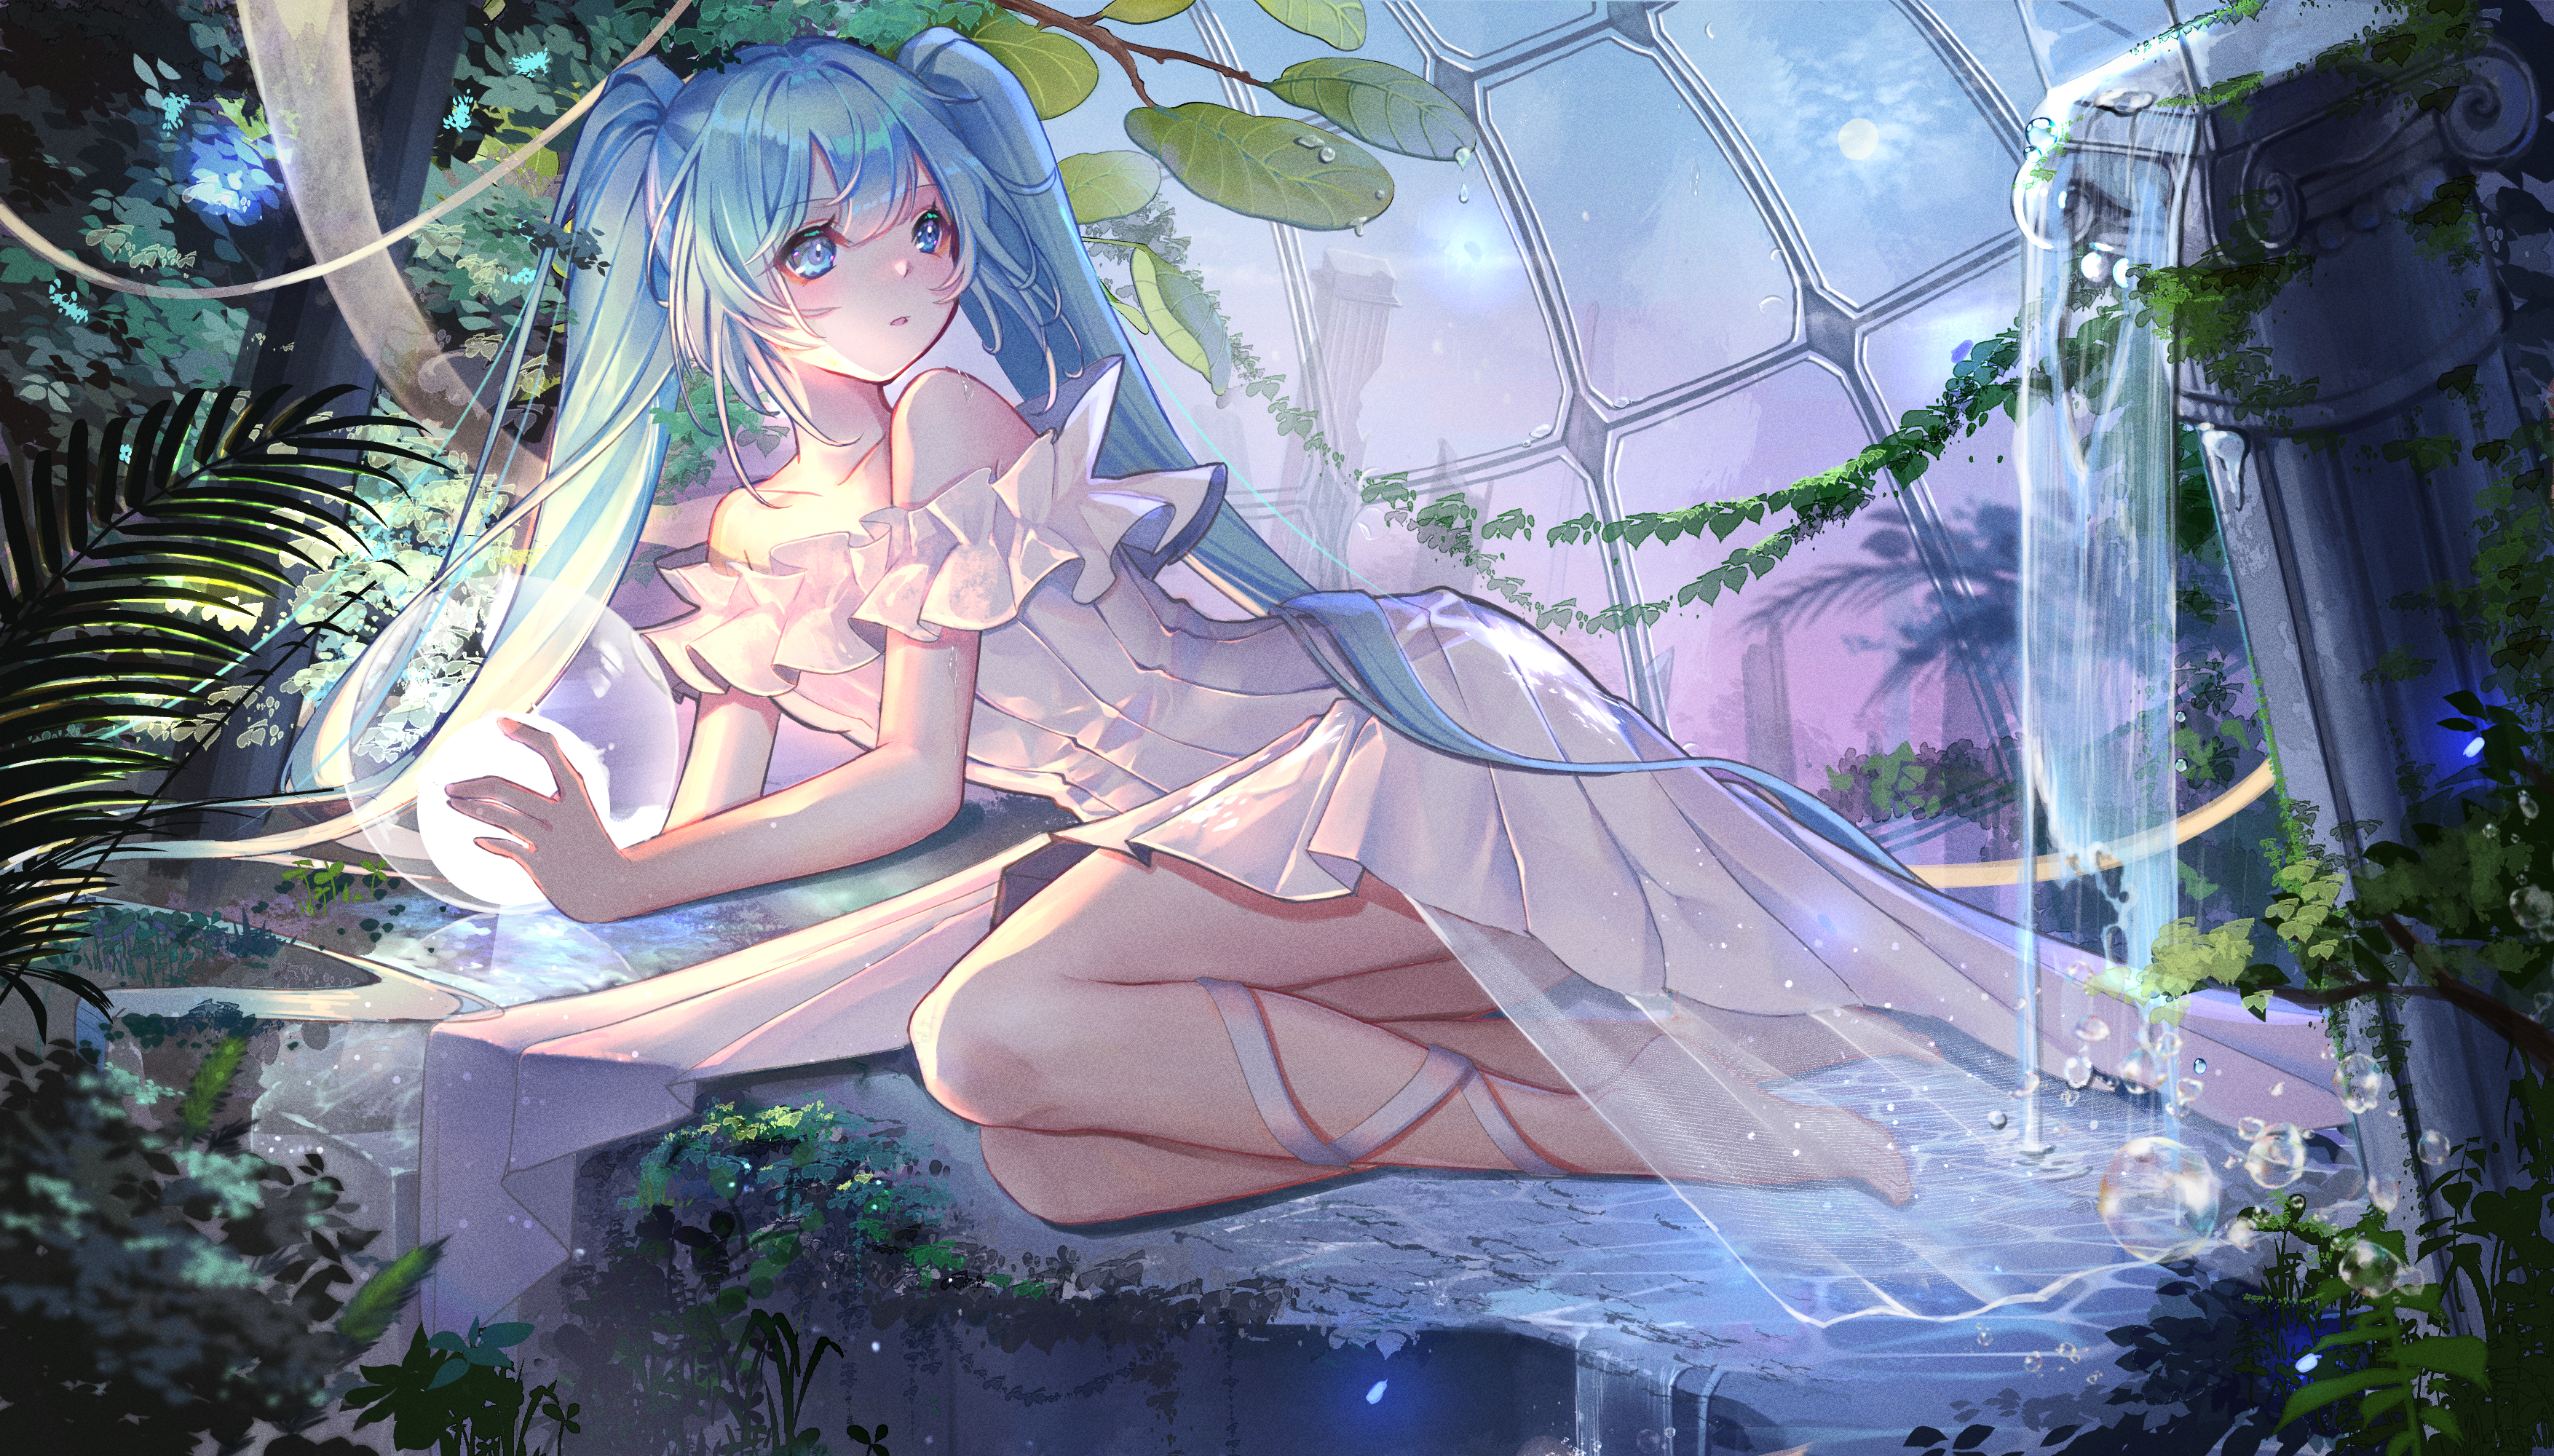 Anime 3508x2000 anime anime girls Hatsune Miku Vocaloid twintails dress blue hair blue eyes water plants leaves looking away feet